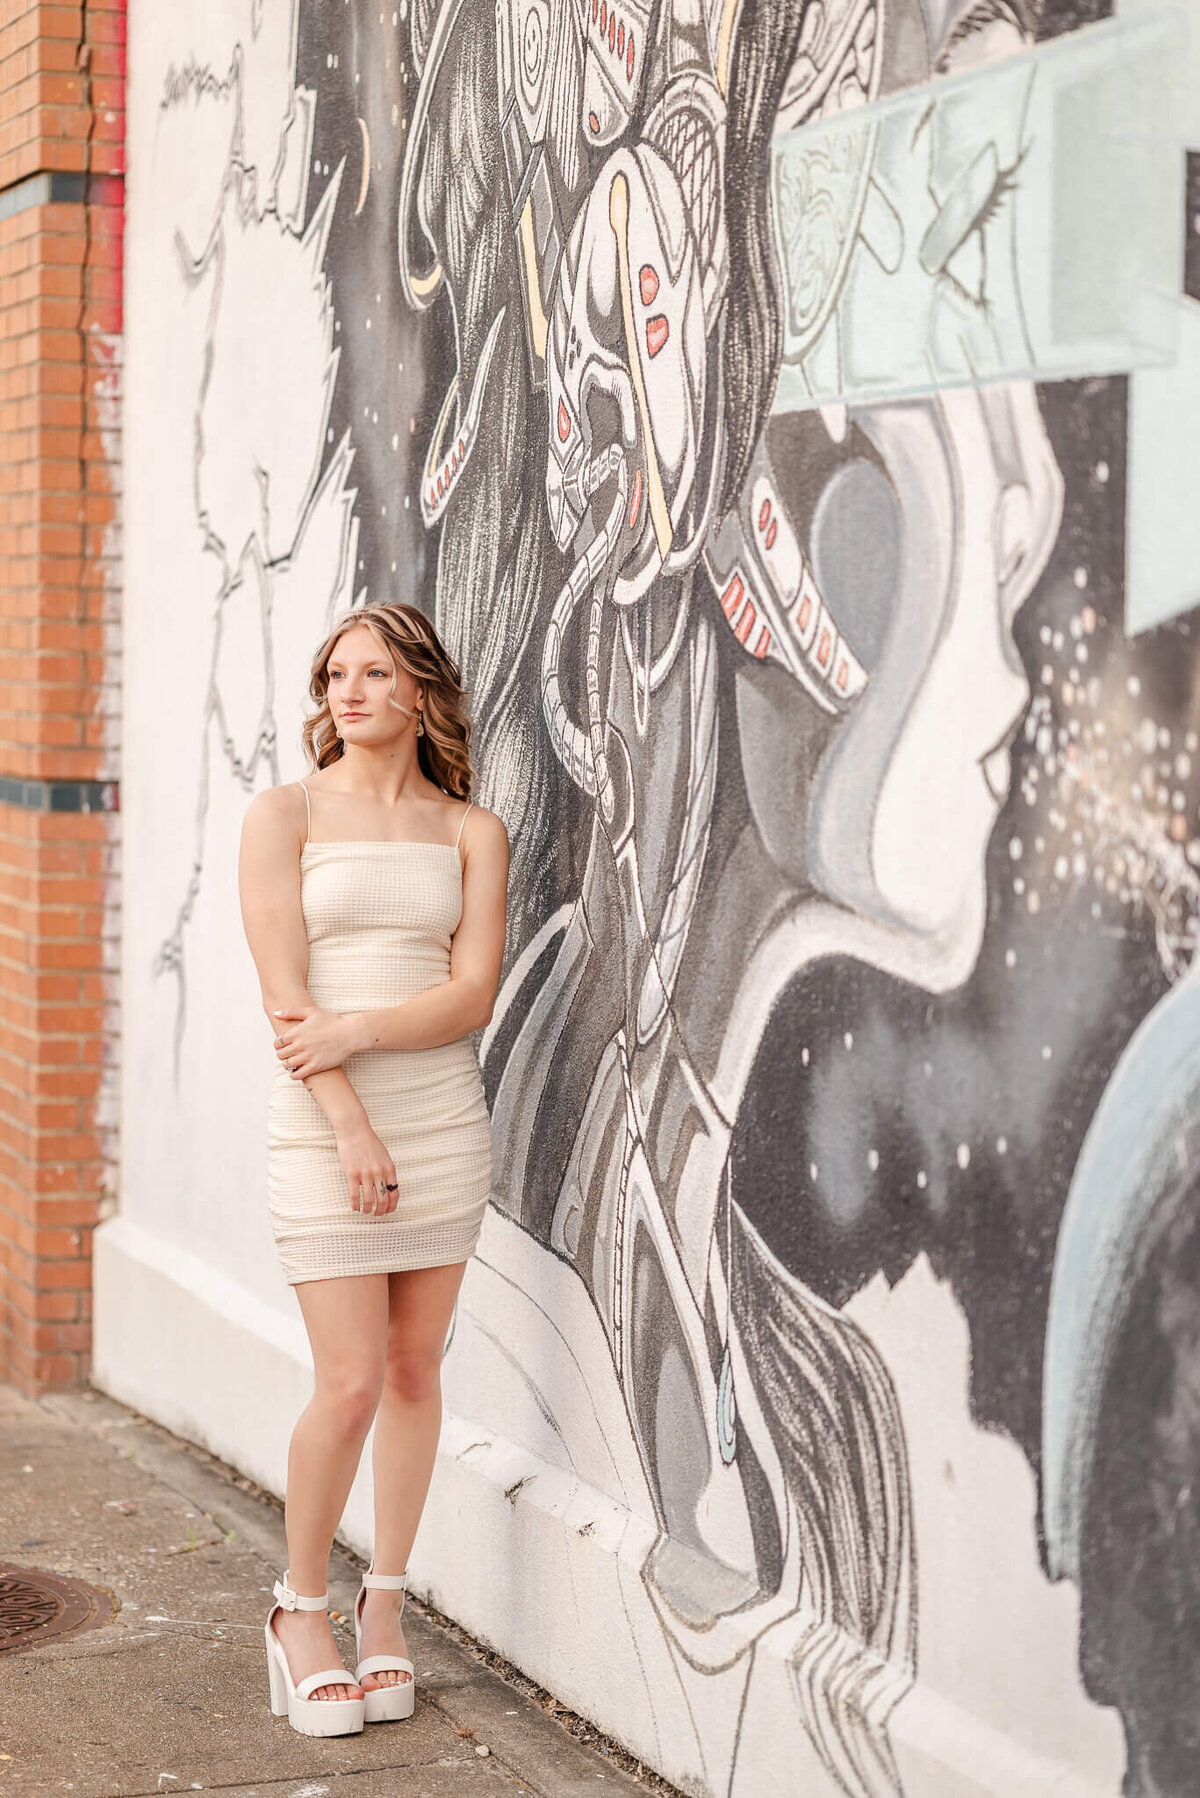 A high school senior, wearing an off-white bodycon dress and shoes, stands by a black and white mural in the Norfolk Neon District.